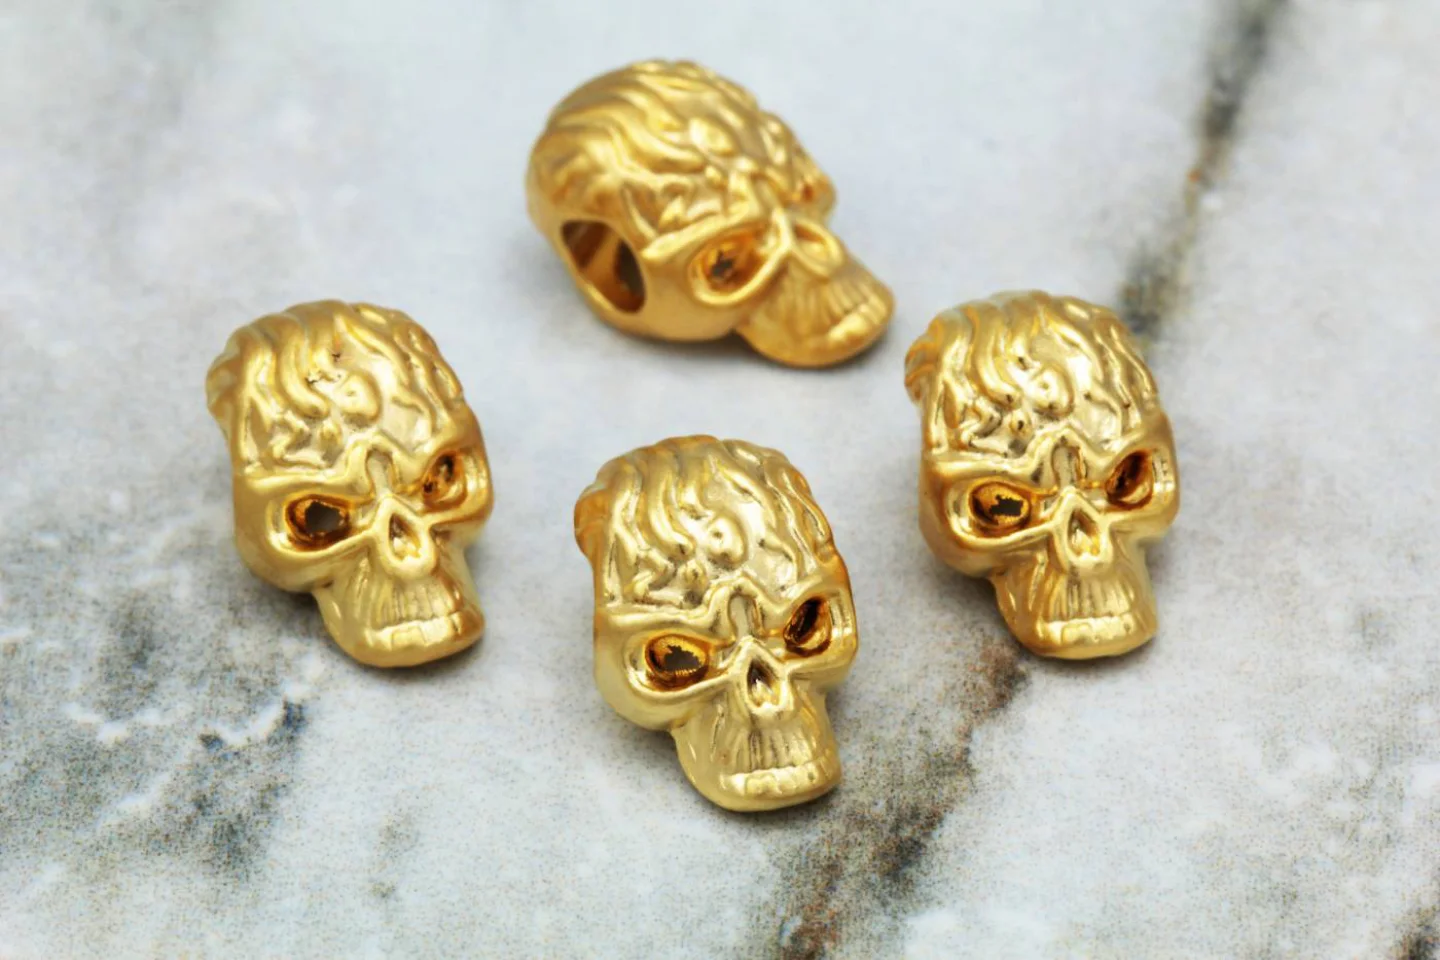 gold-plate-metal-skull-jewelry-charms.